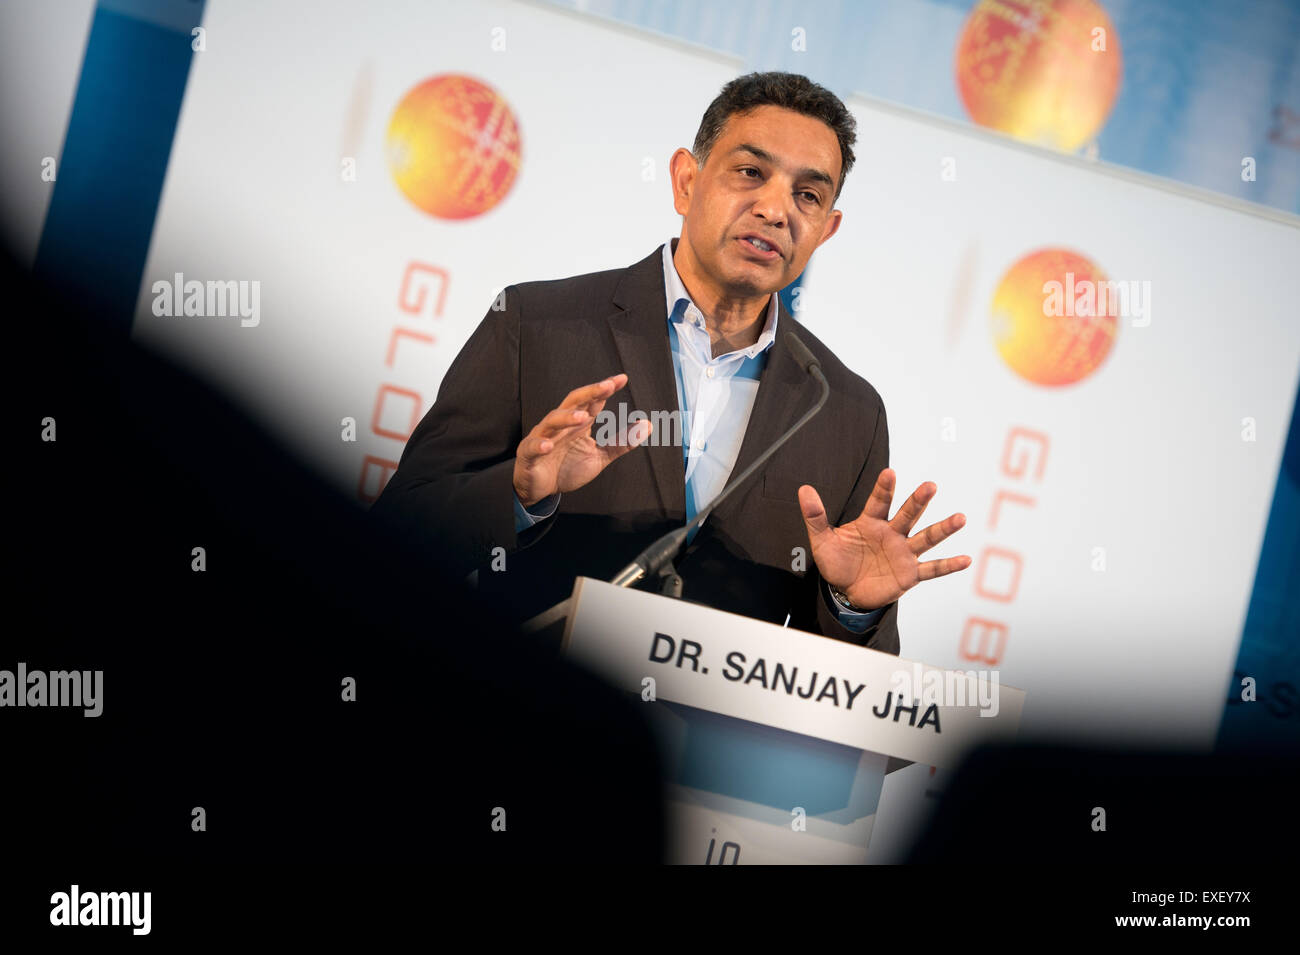 Dresden, Germany. 13th July, 2015. The CEO of Globalfoundries, Sanjay Jha, speaks during a press conference in Dresden, Germany, 13 July 2015. At the press conferenfce the new semi-conductor '22FDX' technology was introduced. Globalfoundaries plan an investment in Saxony until 2017 of around 250 million US dollars for the introduction of the technology-development the subsequent enlargement of their productions capacity, Photo: ARNO BURGI/dpa/Alamy Live News Stock Photo